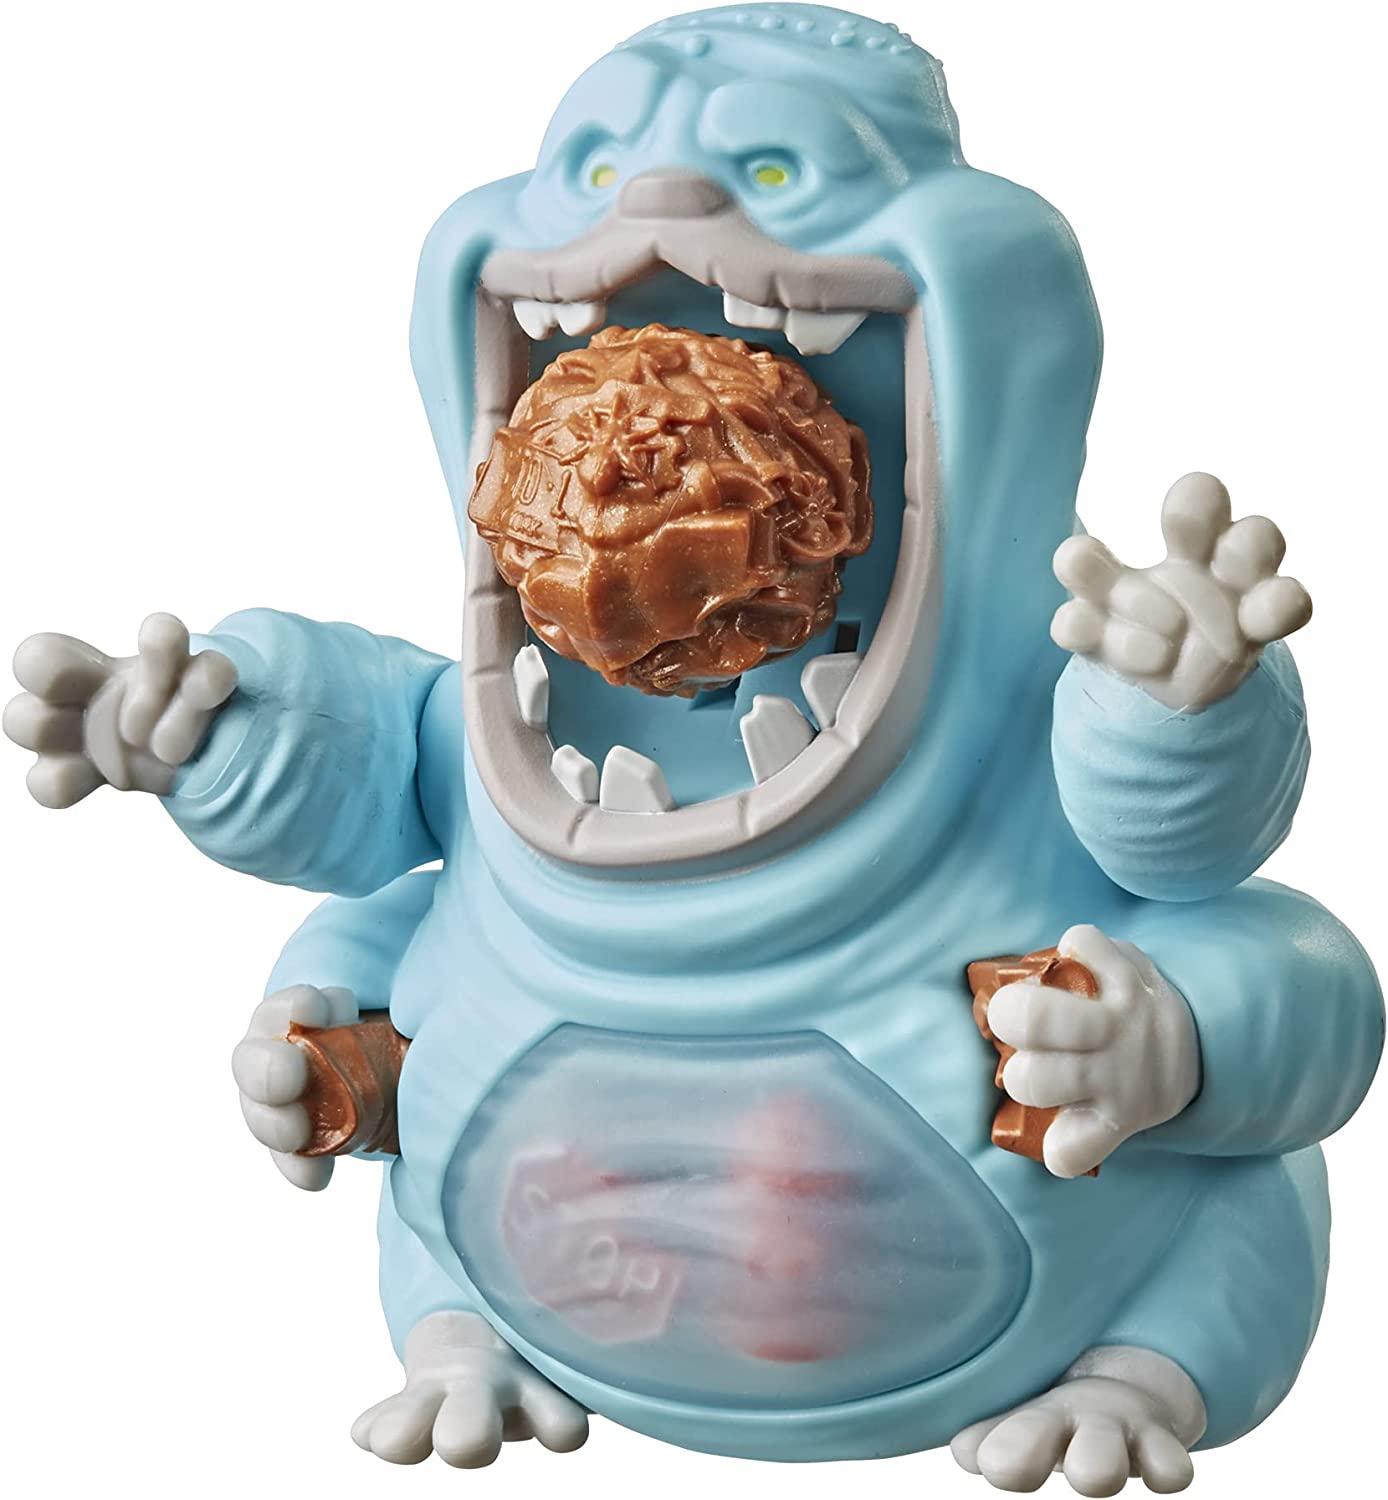 Muncher - Ghostbusters: Fright Feature Action Figure